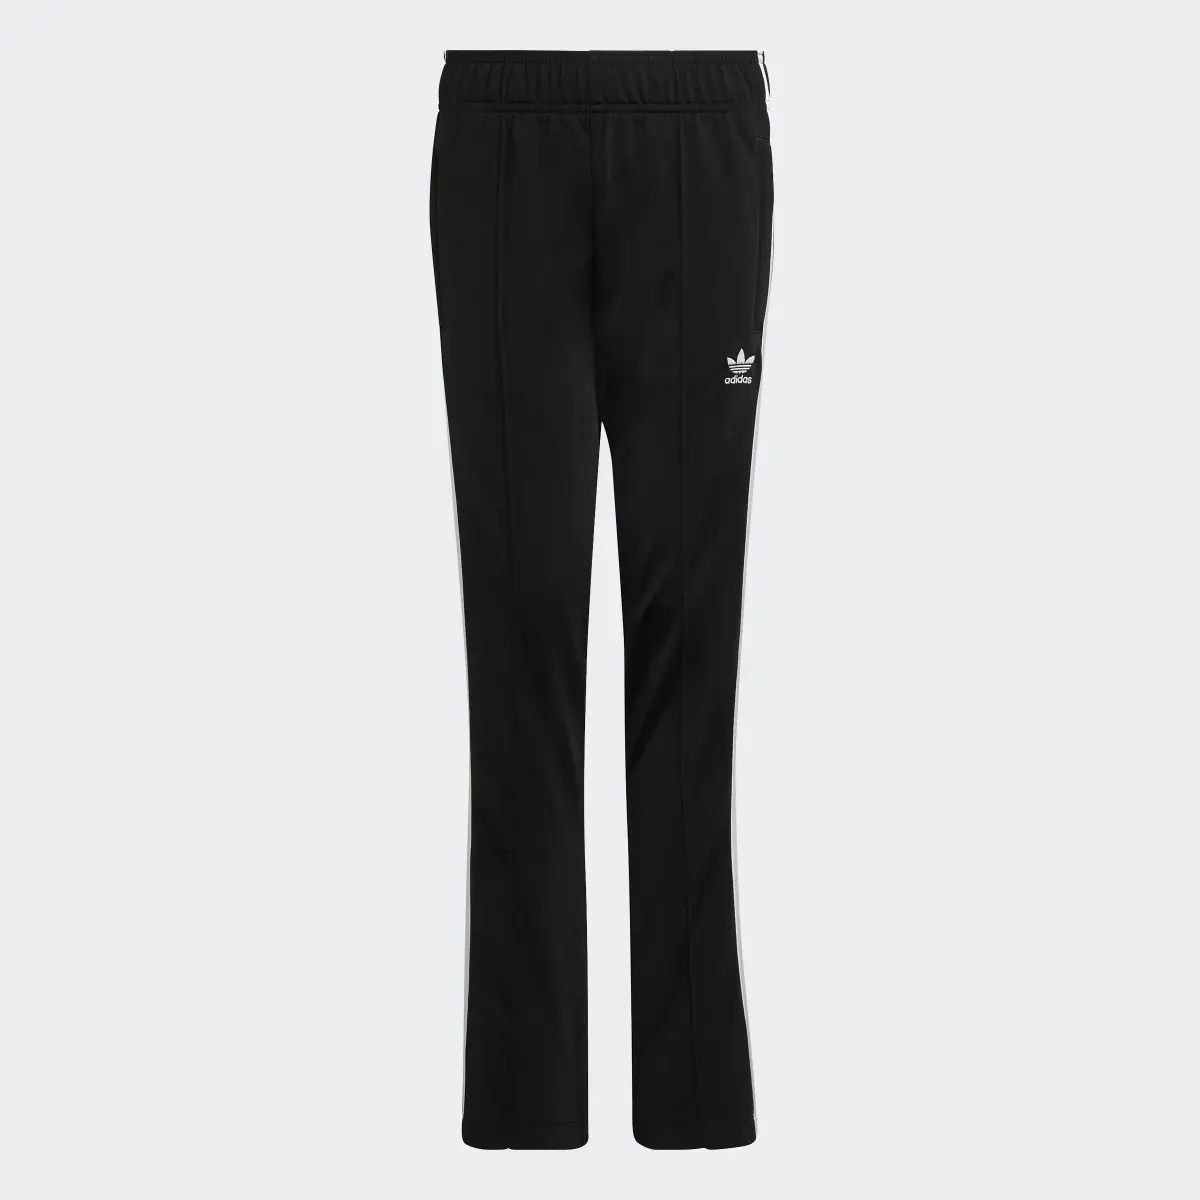 Adidas 3-Stripes Flared Tracksuit Bottoms. 1